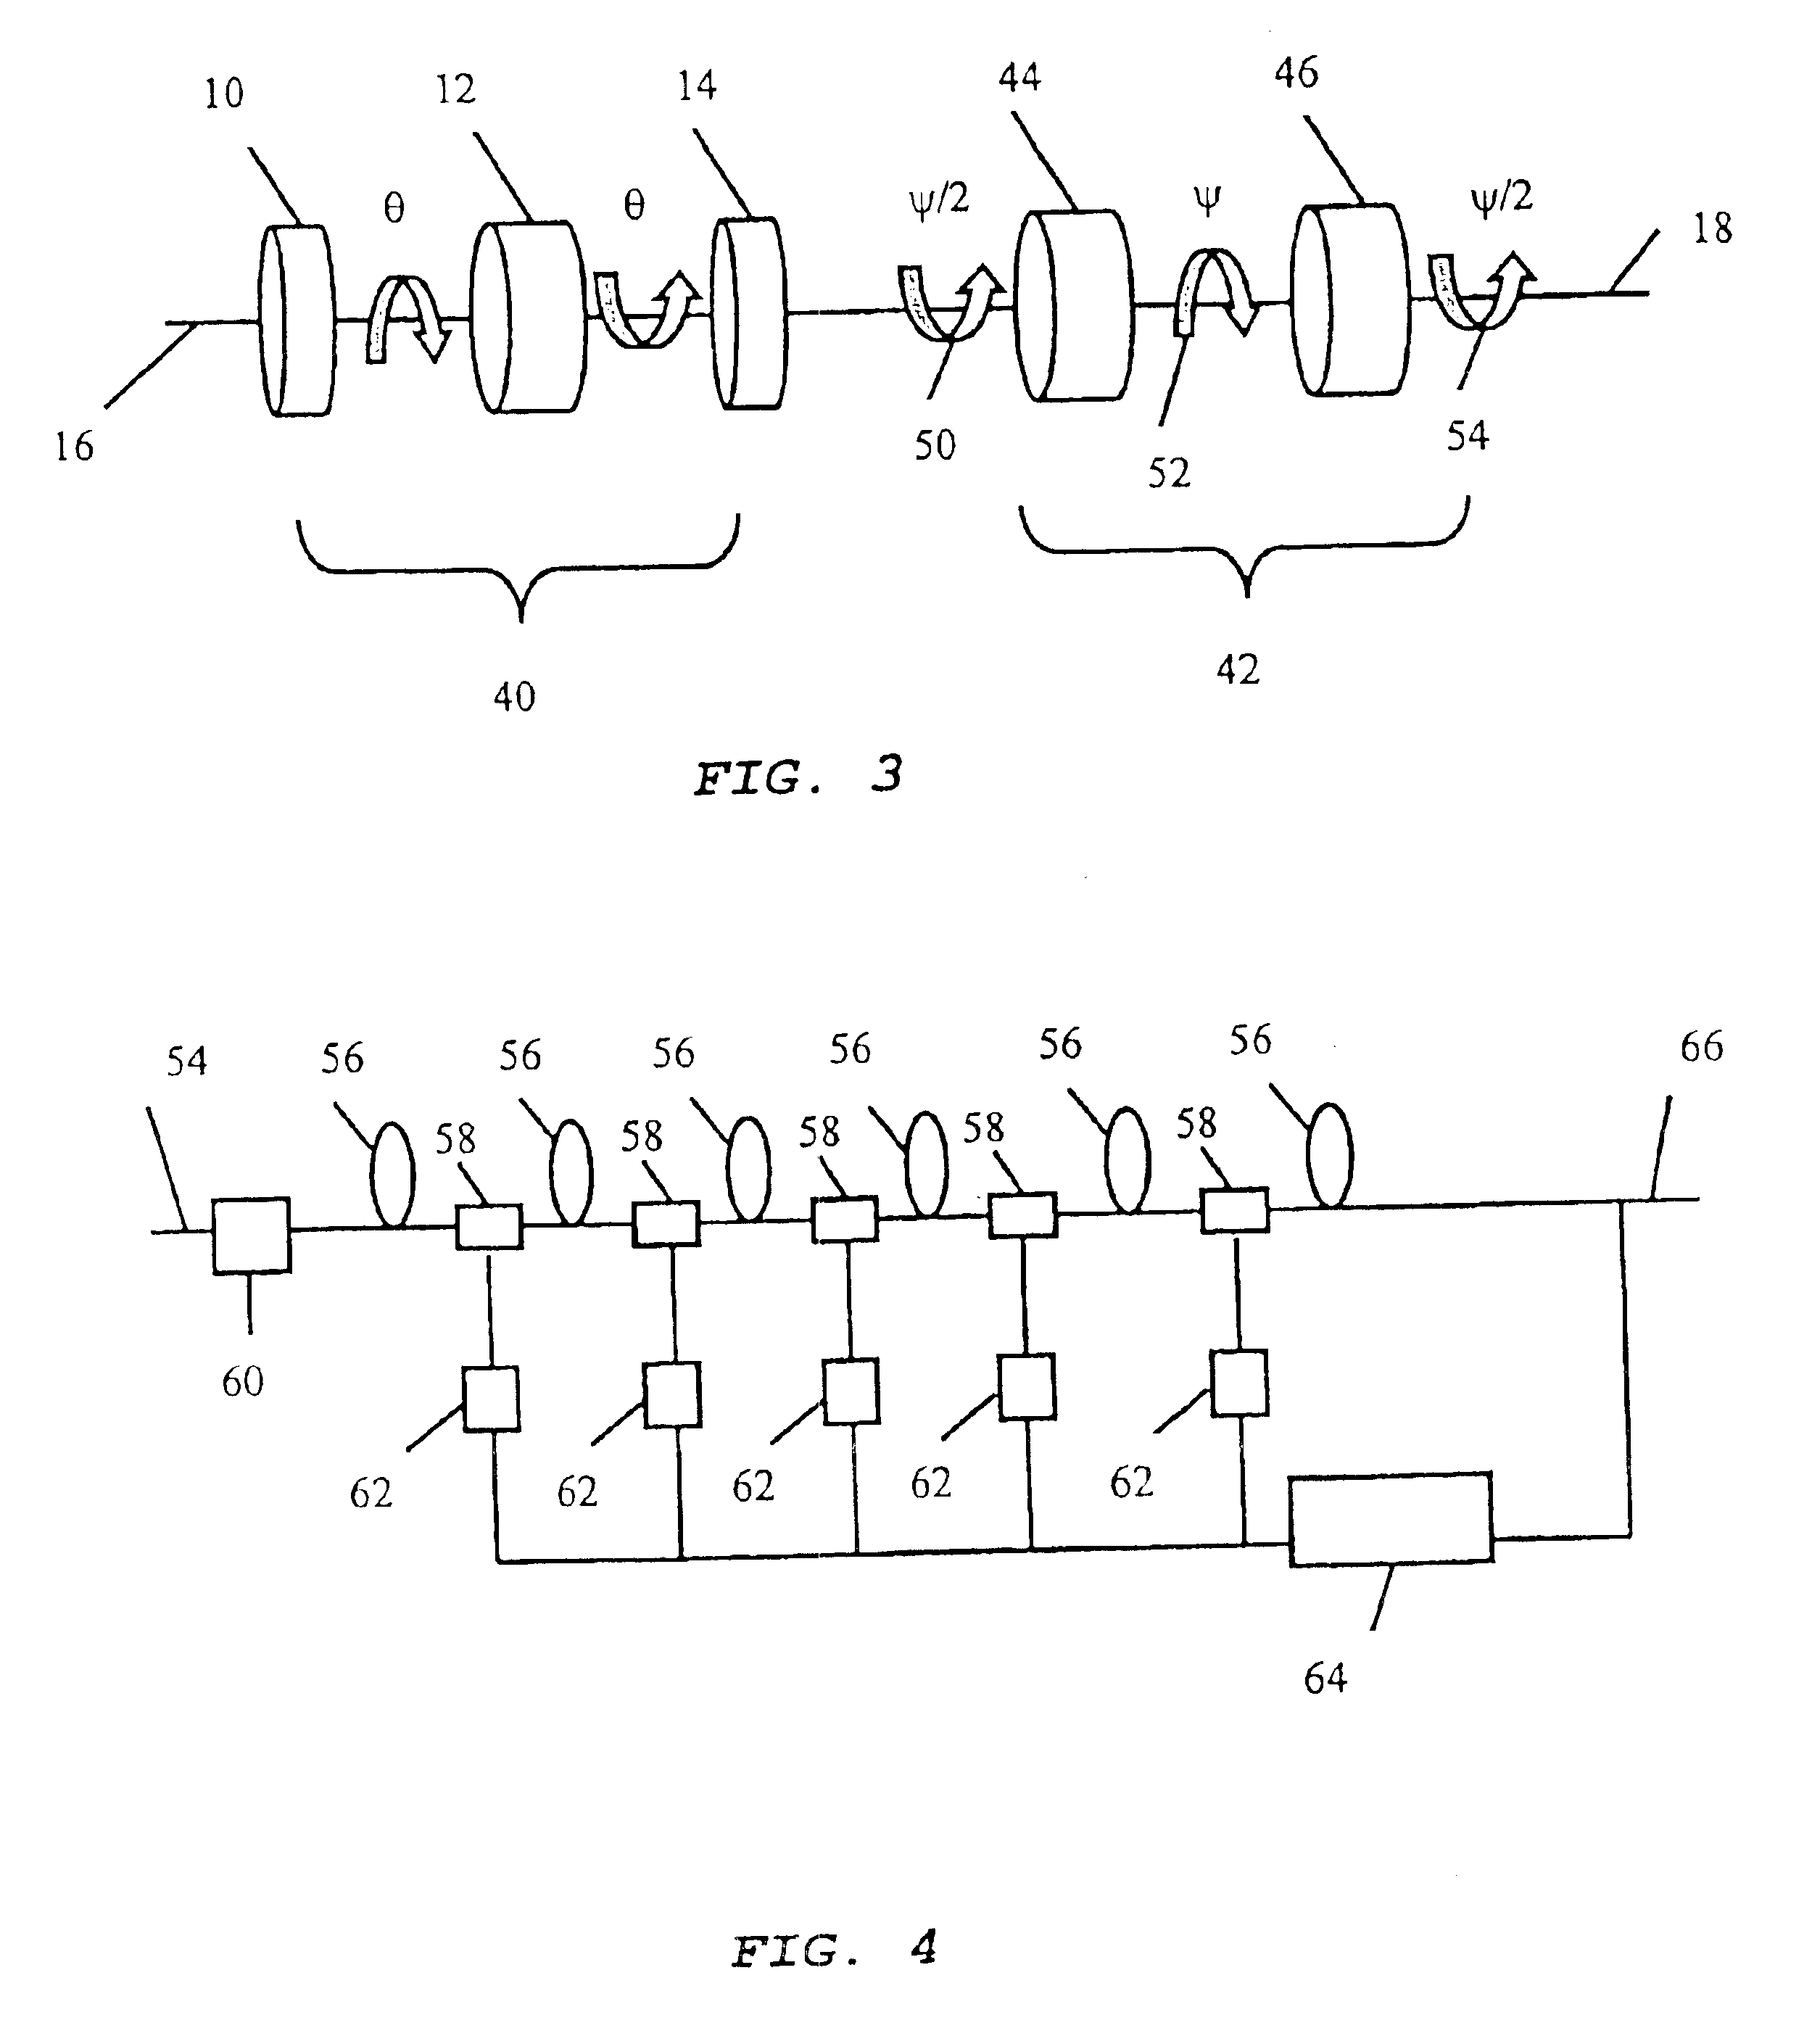 Generation of variable differential group delay